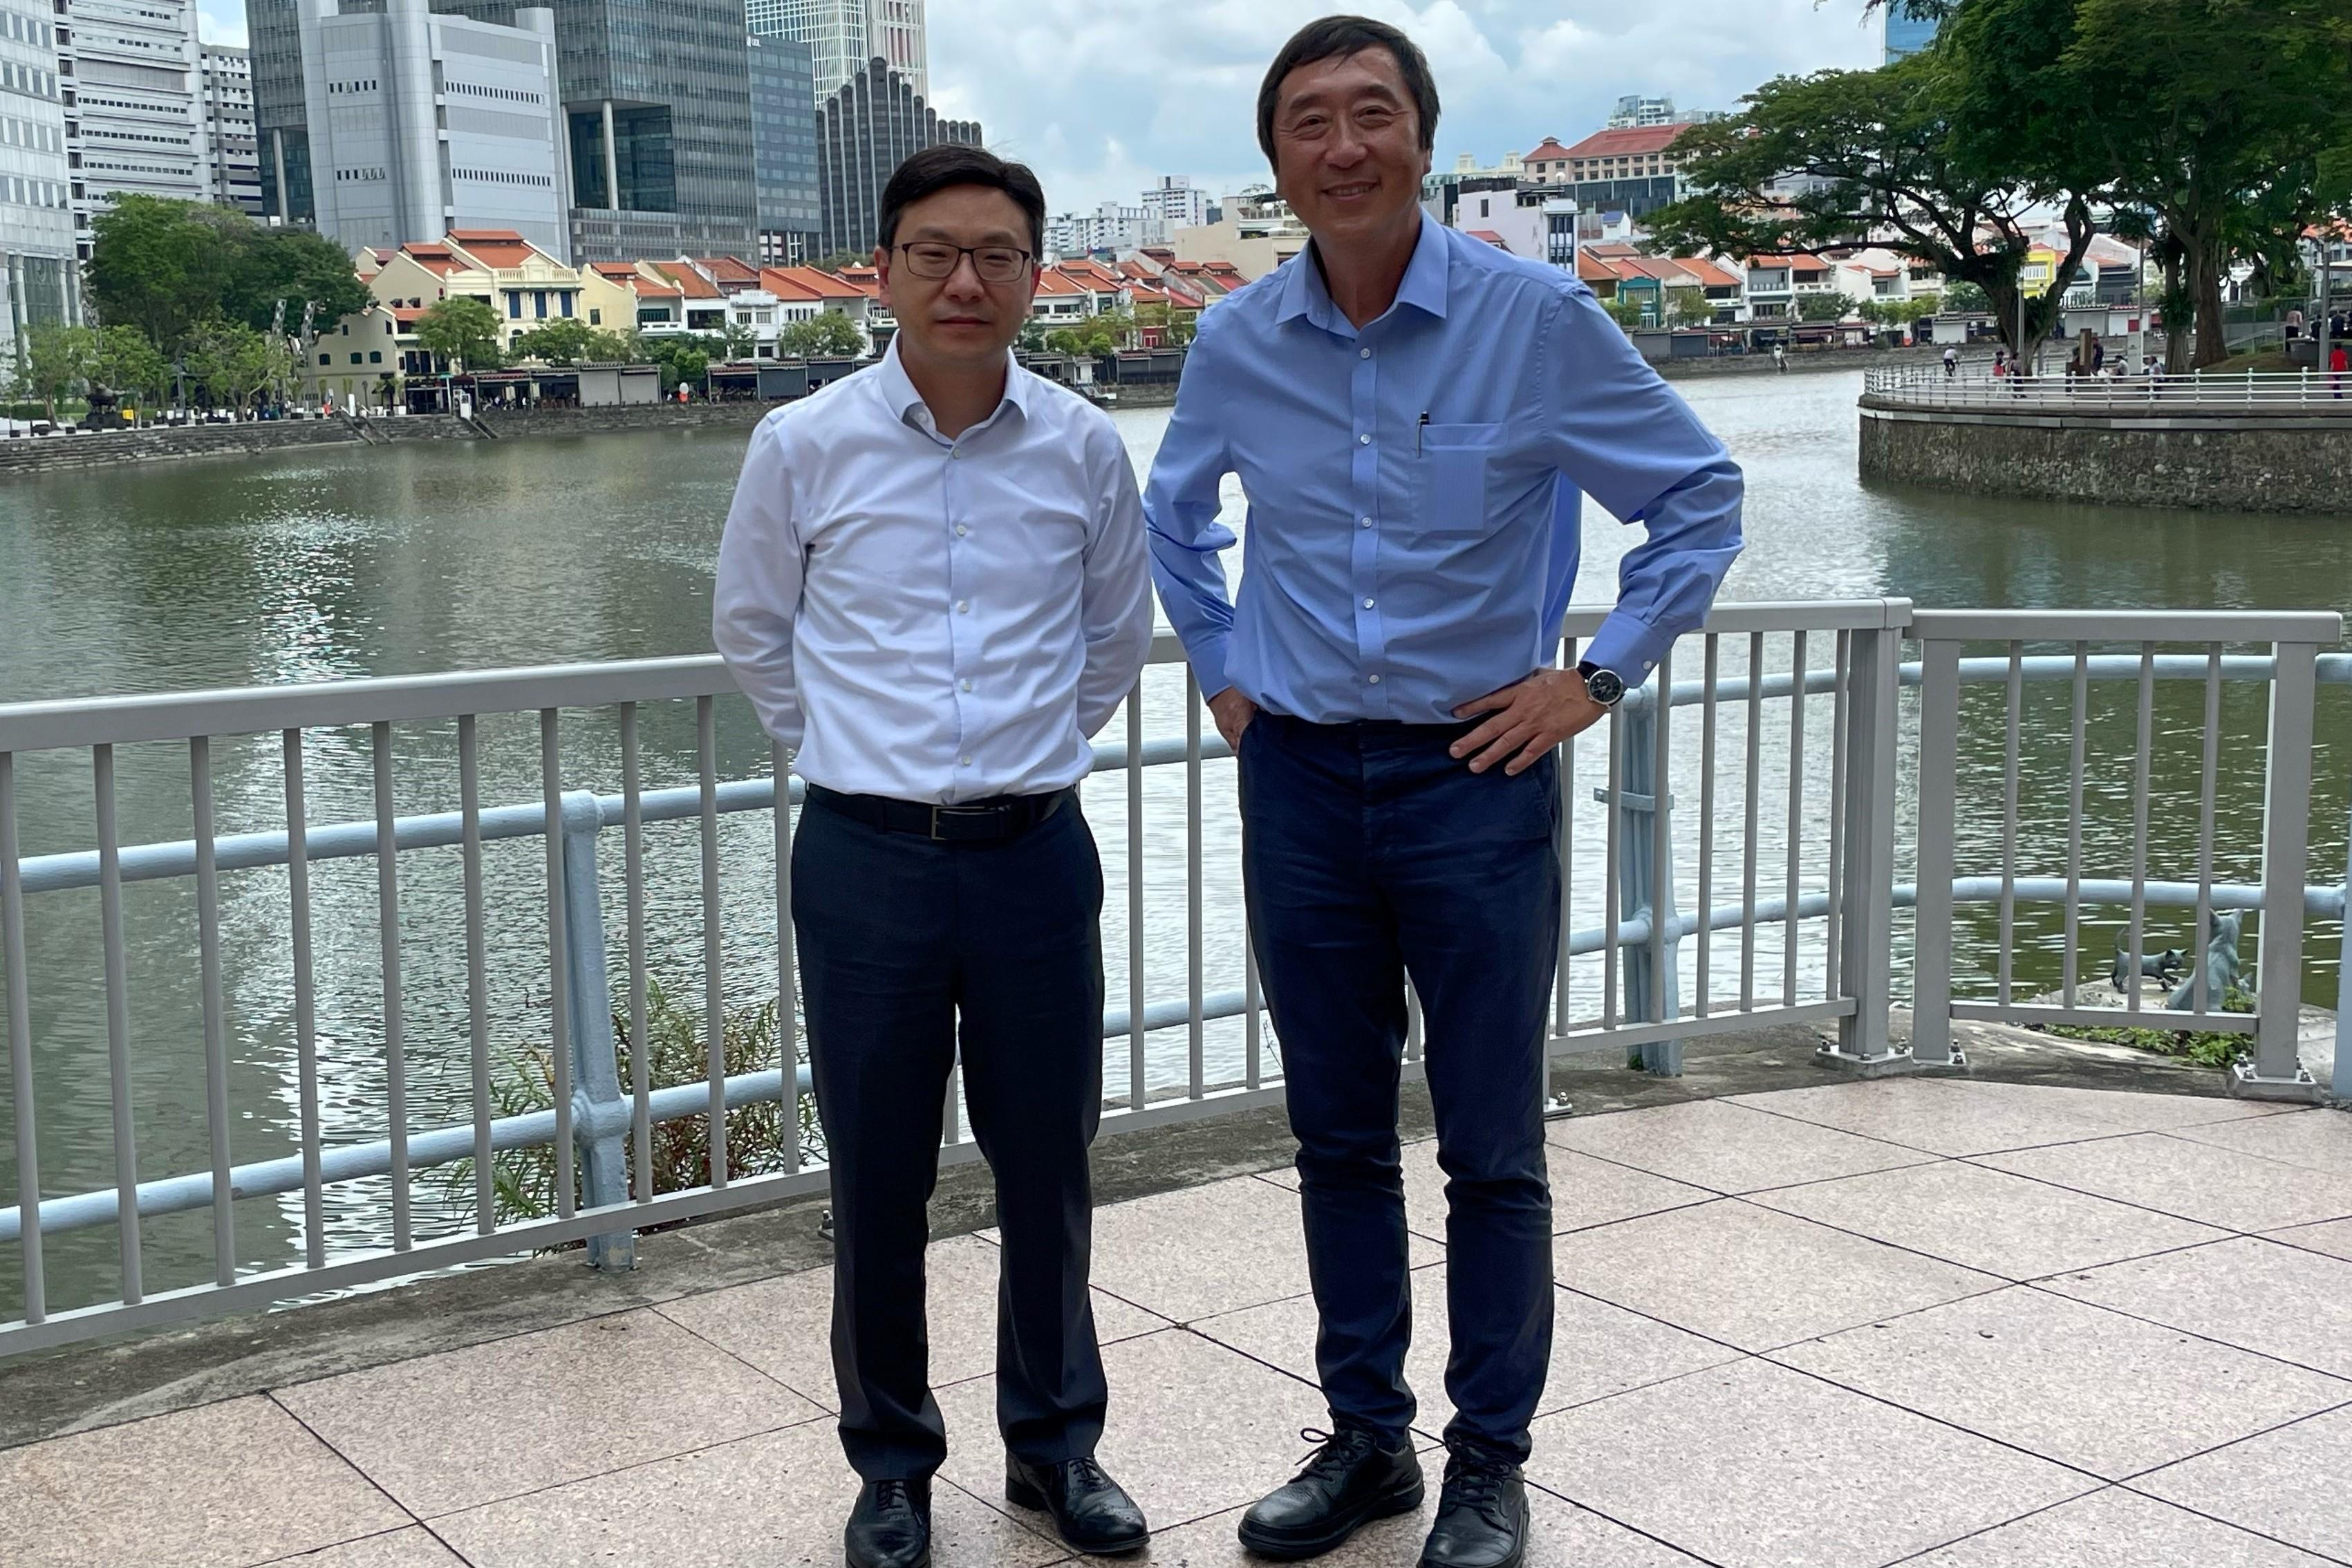 The Secretary for Labour and Welfare, Mr Chris Sun, had lunch with the Senior Vice President (Health and Life Sciences) of Nanyang Technological University, Singapore, Professor Joseph Sung, this afternoon (January 7) during his visit to Singapore and discussed Hong Kong's initiatives to attract enterprises, investment and talents. Photo shows Mr Sun (left) and Professor Sung (right).